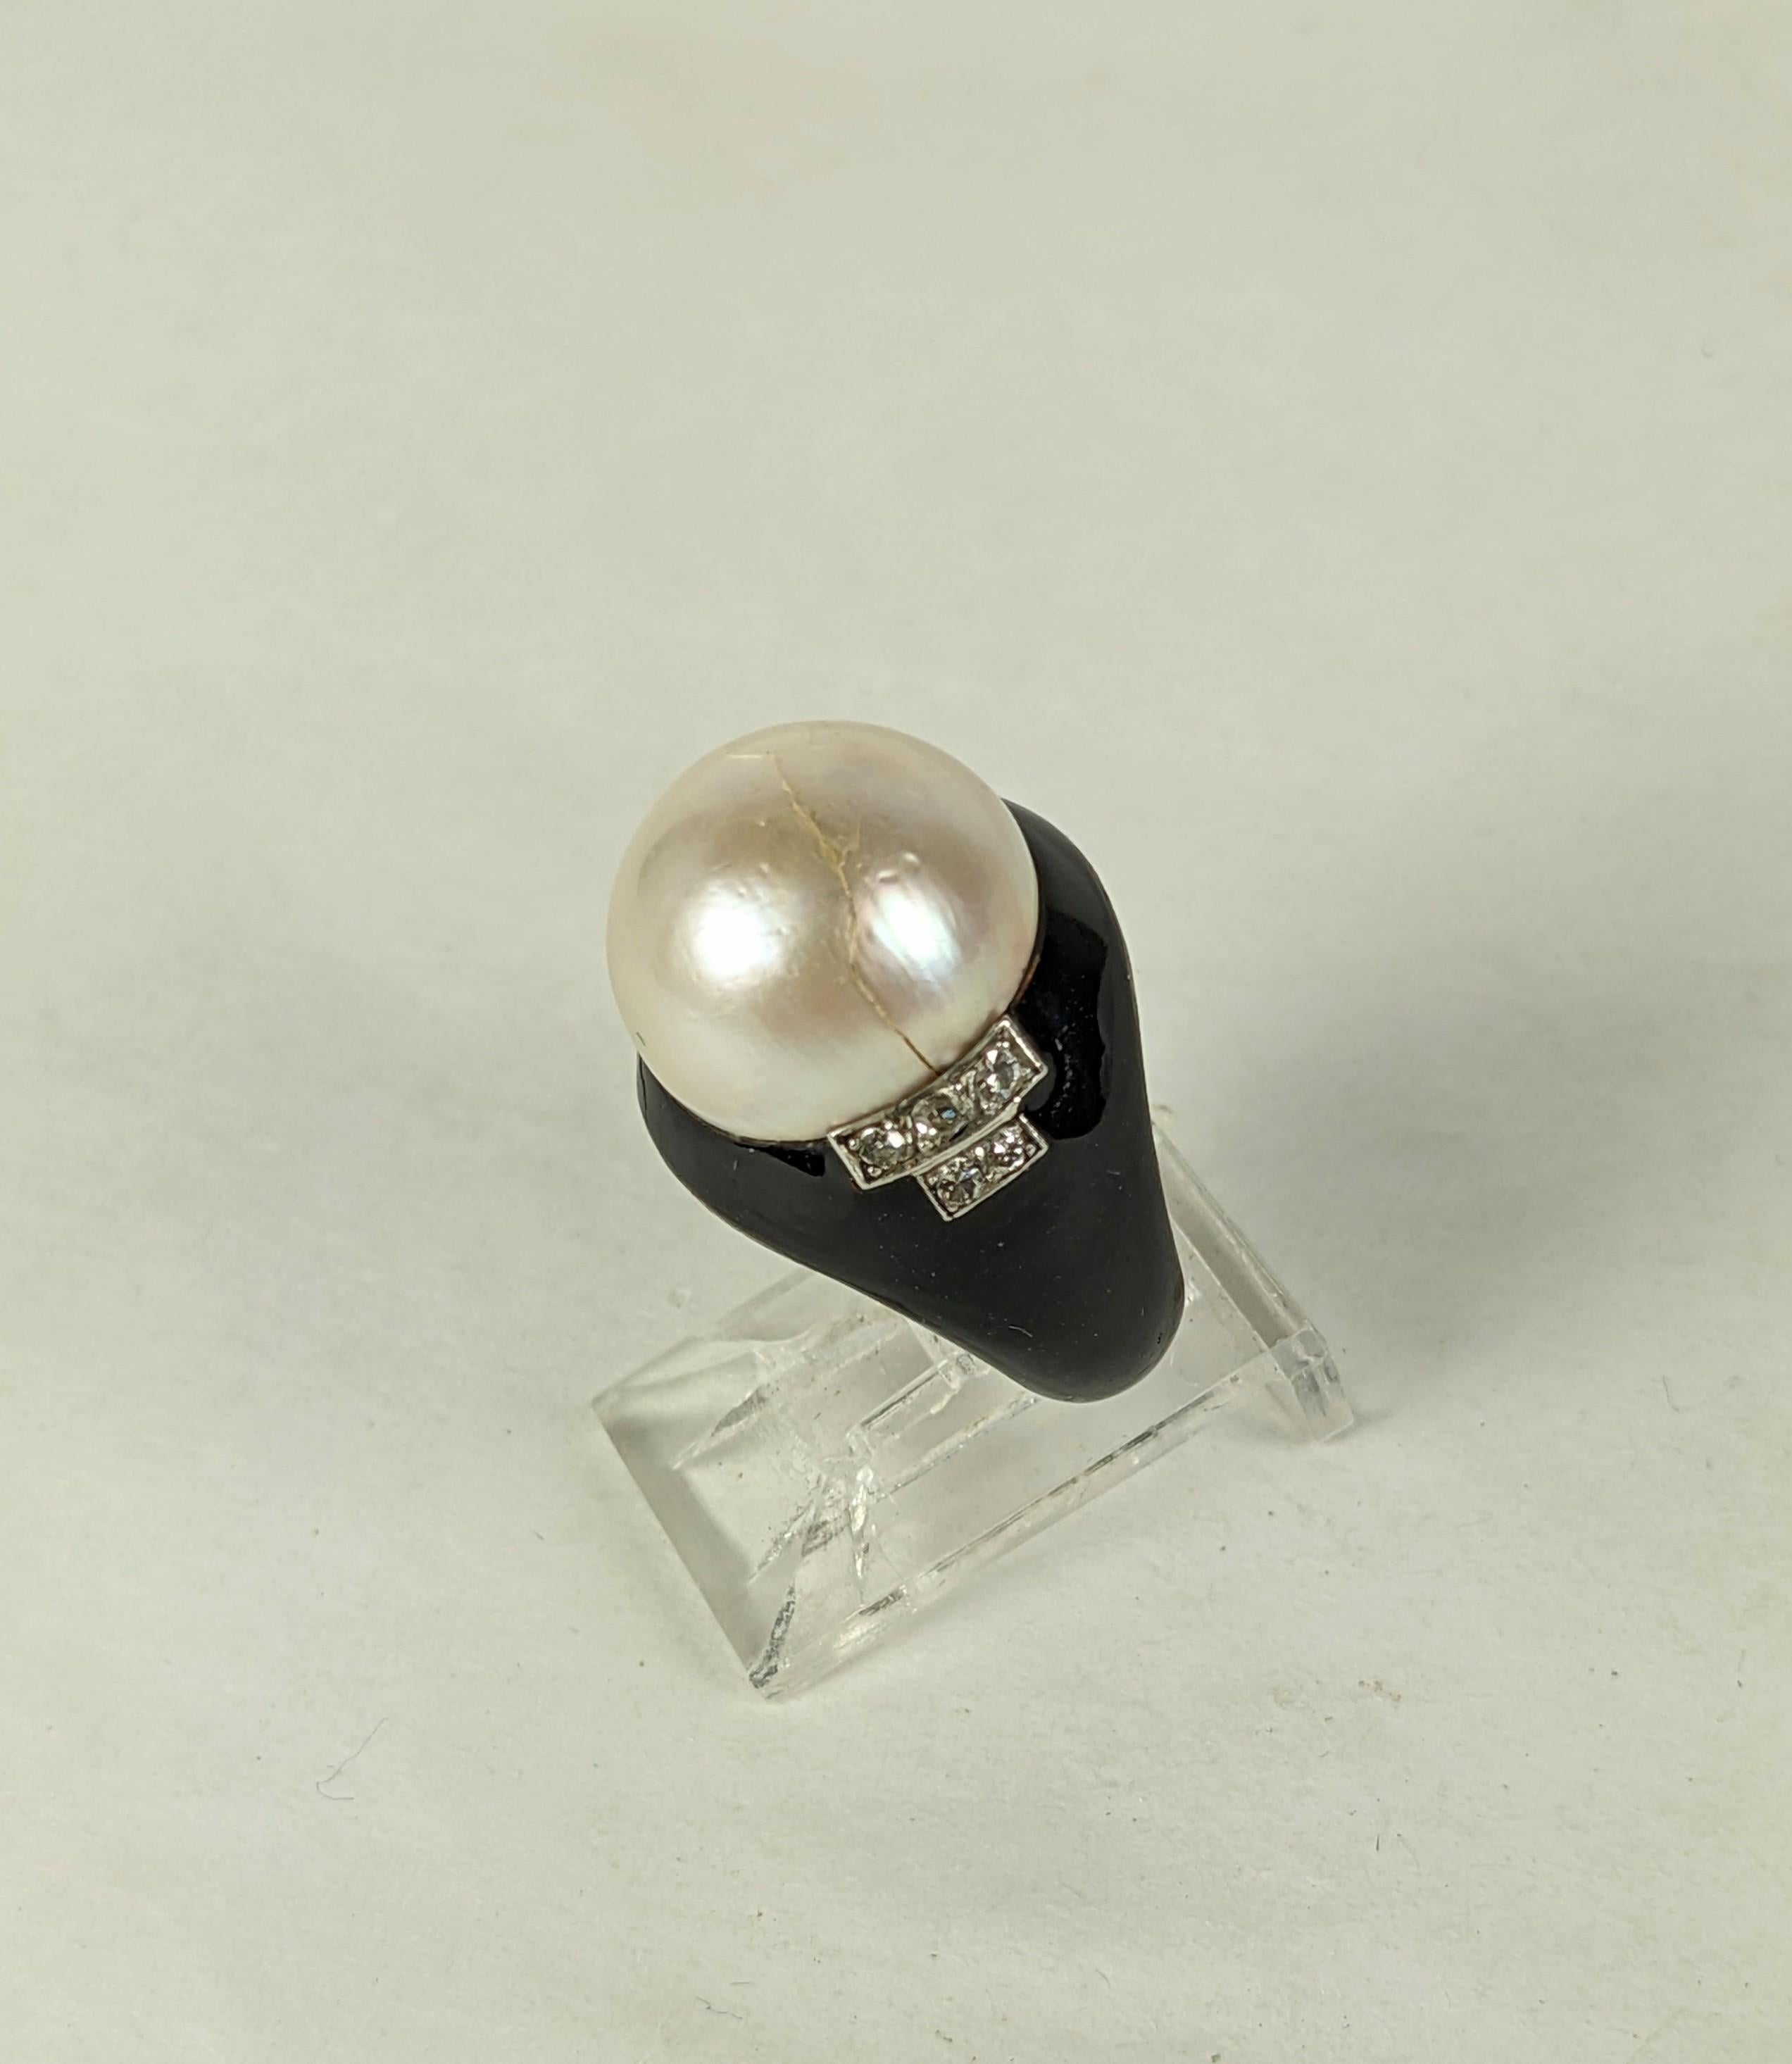 Lovely Art Deco Mabe Pearl, Enamel and Diamond Ring, Attributed to Rene Boivin from the 1920's. Set in silver with a large domed mabe pearl and stepped design on diamonds running down the shoulders on a base of black enamel. Unsigned. 1920's France. 